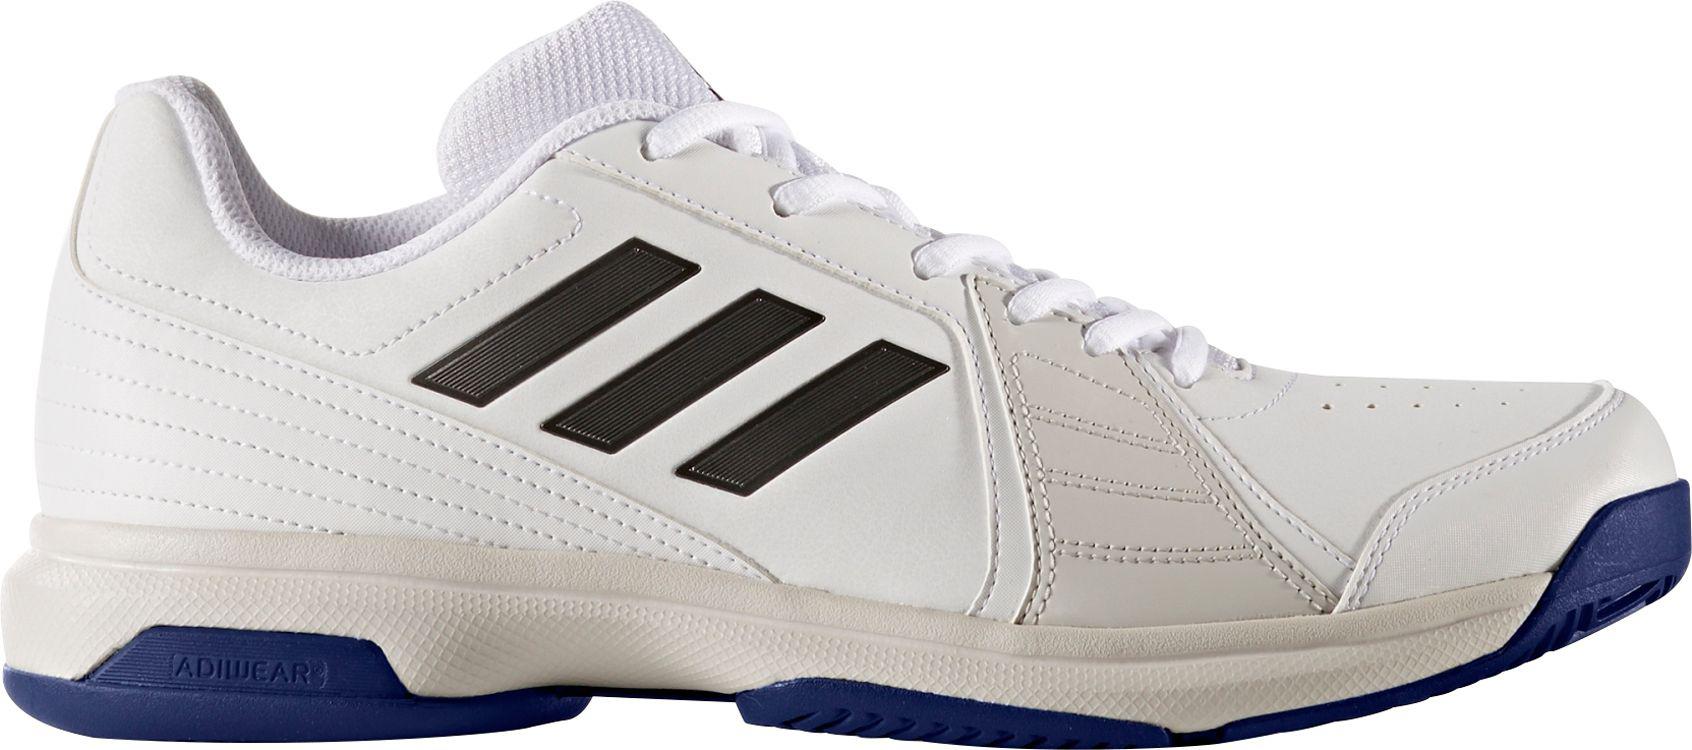 adidas Synthetic Adizero Approach Tennis Shoes for Men - Lyst